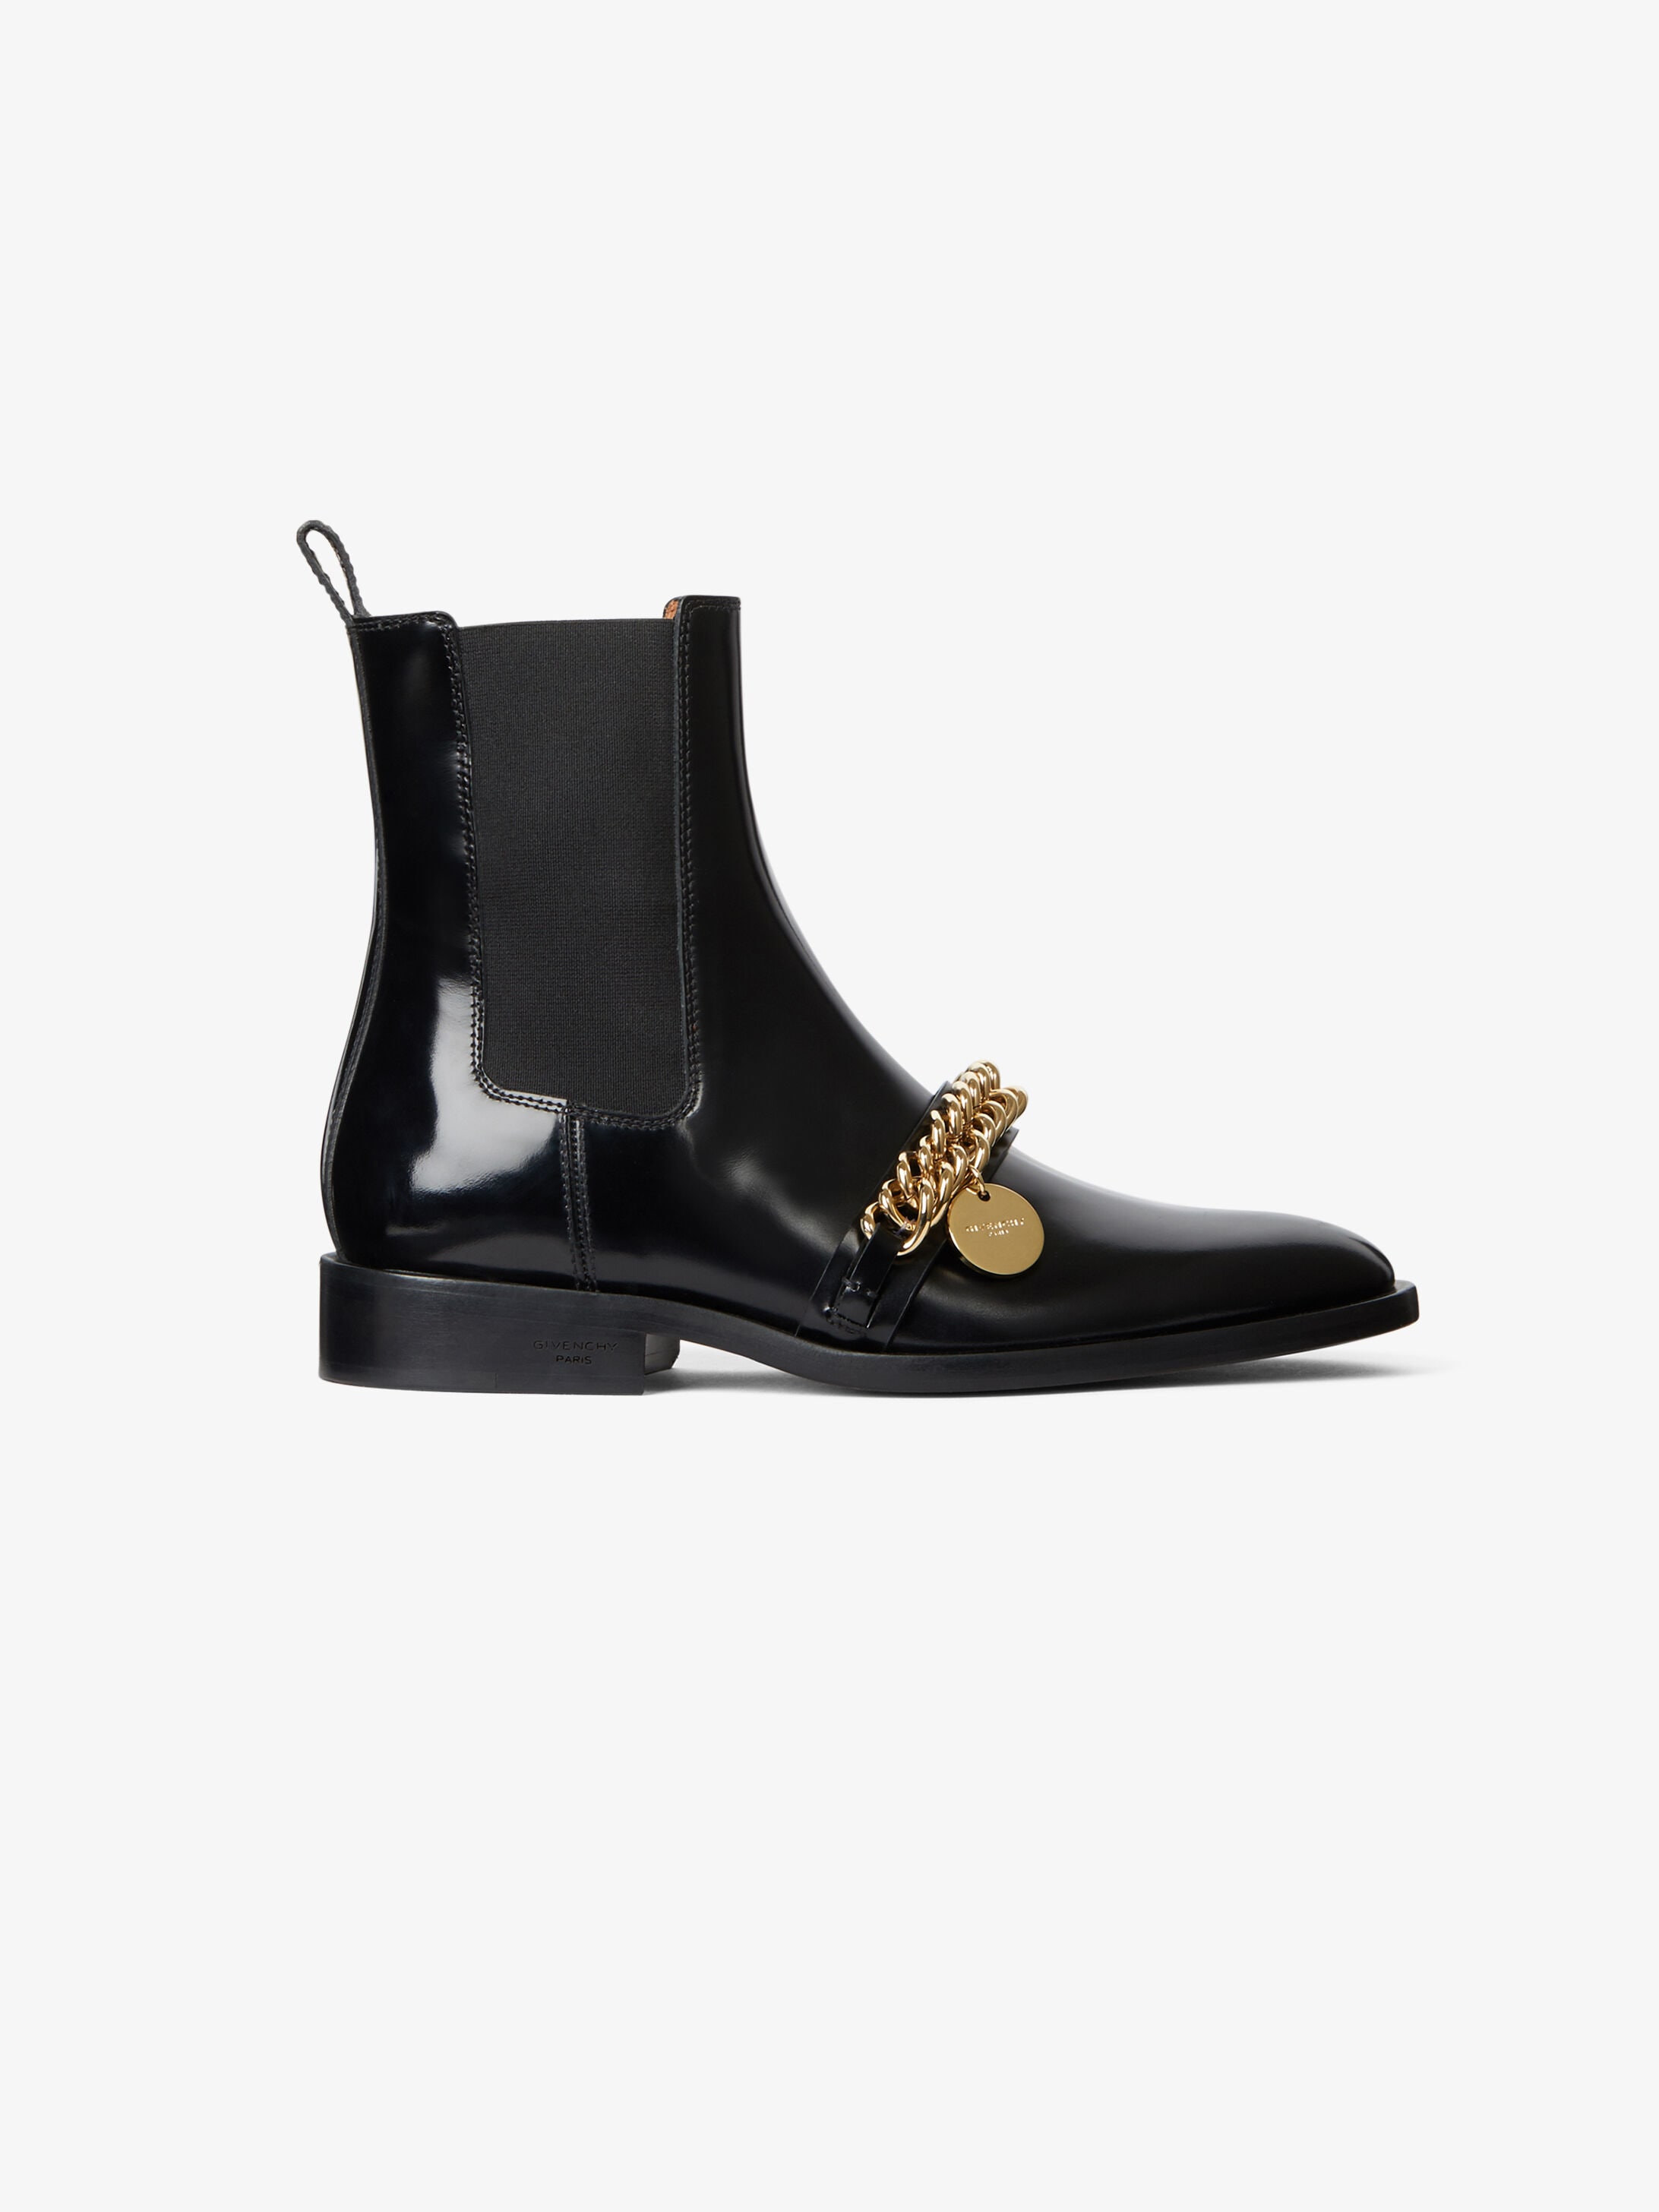 givenchy ladies boots